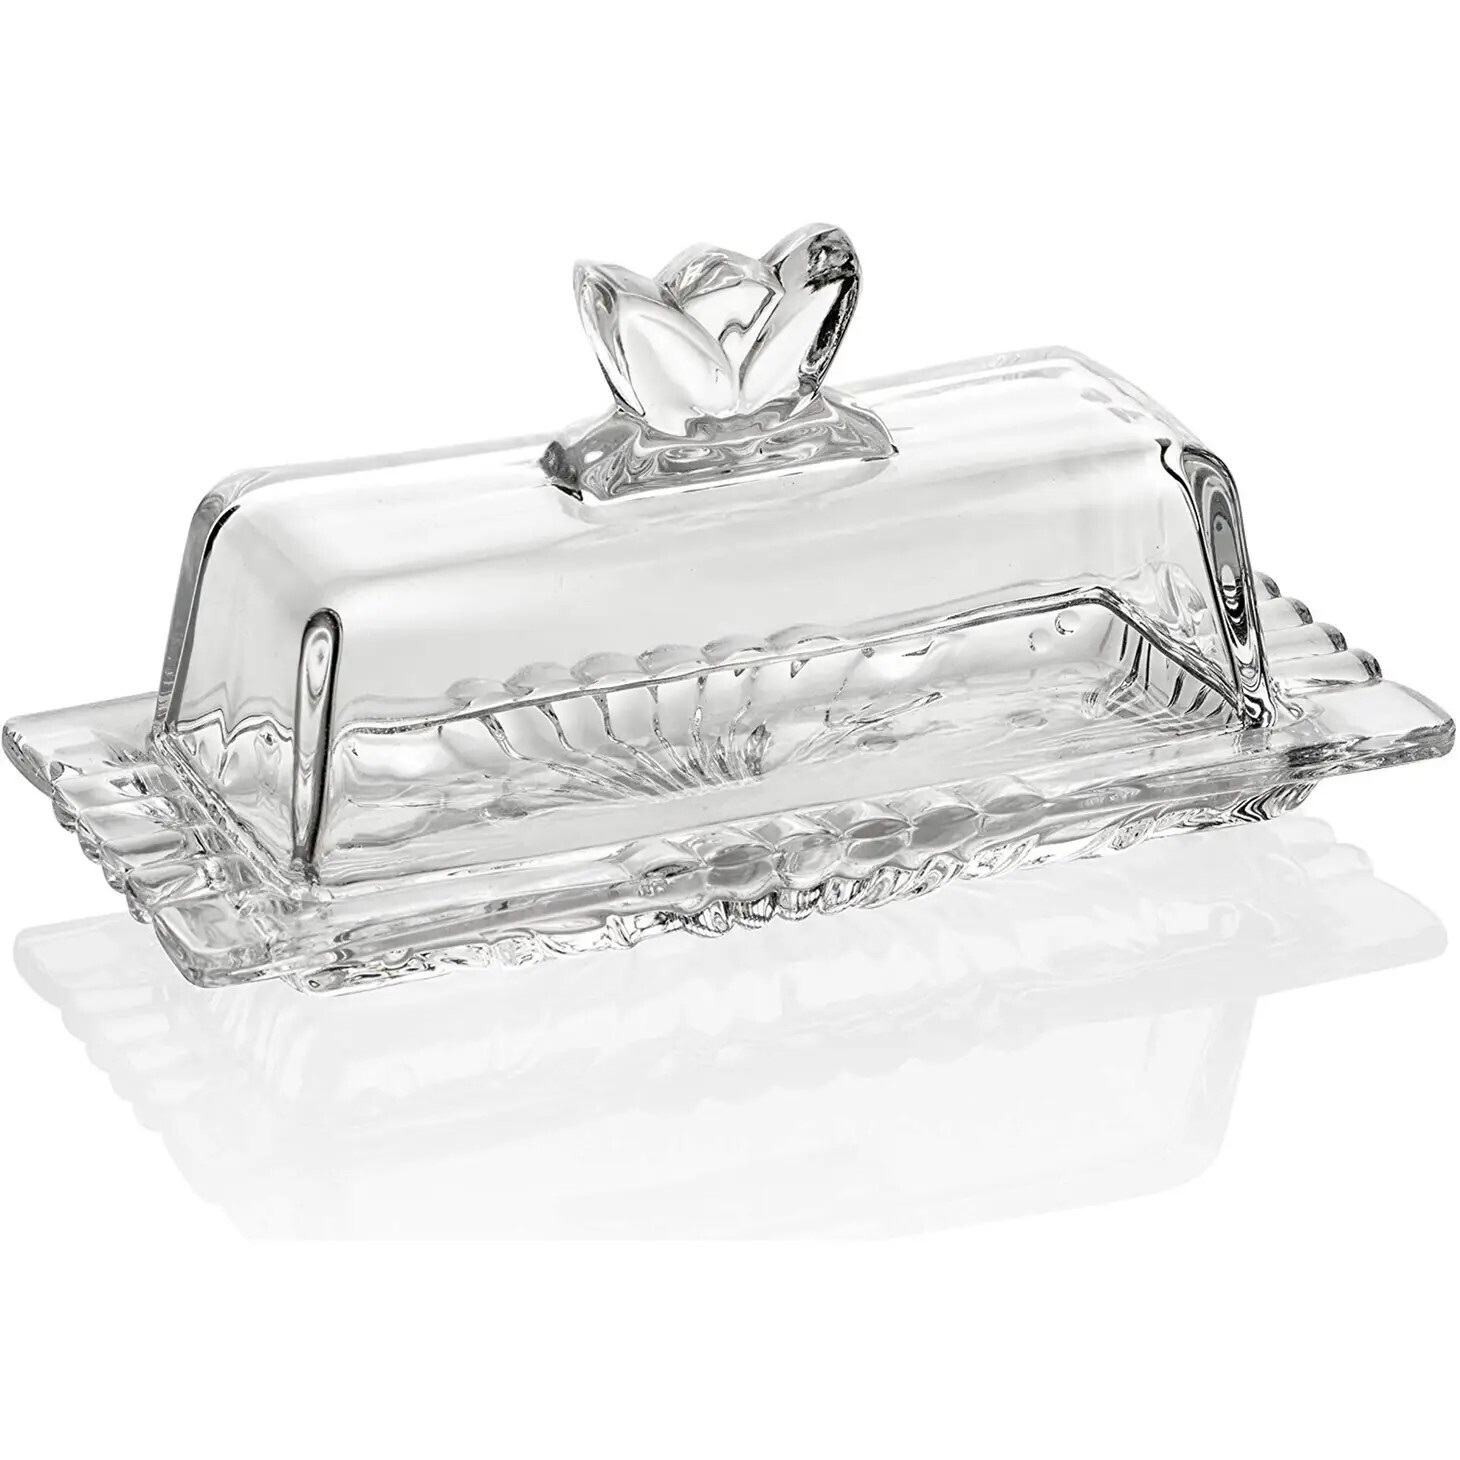 Glass Butter Dish With Flower Lid+